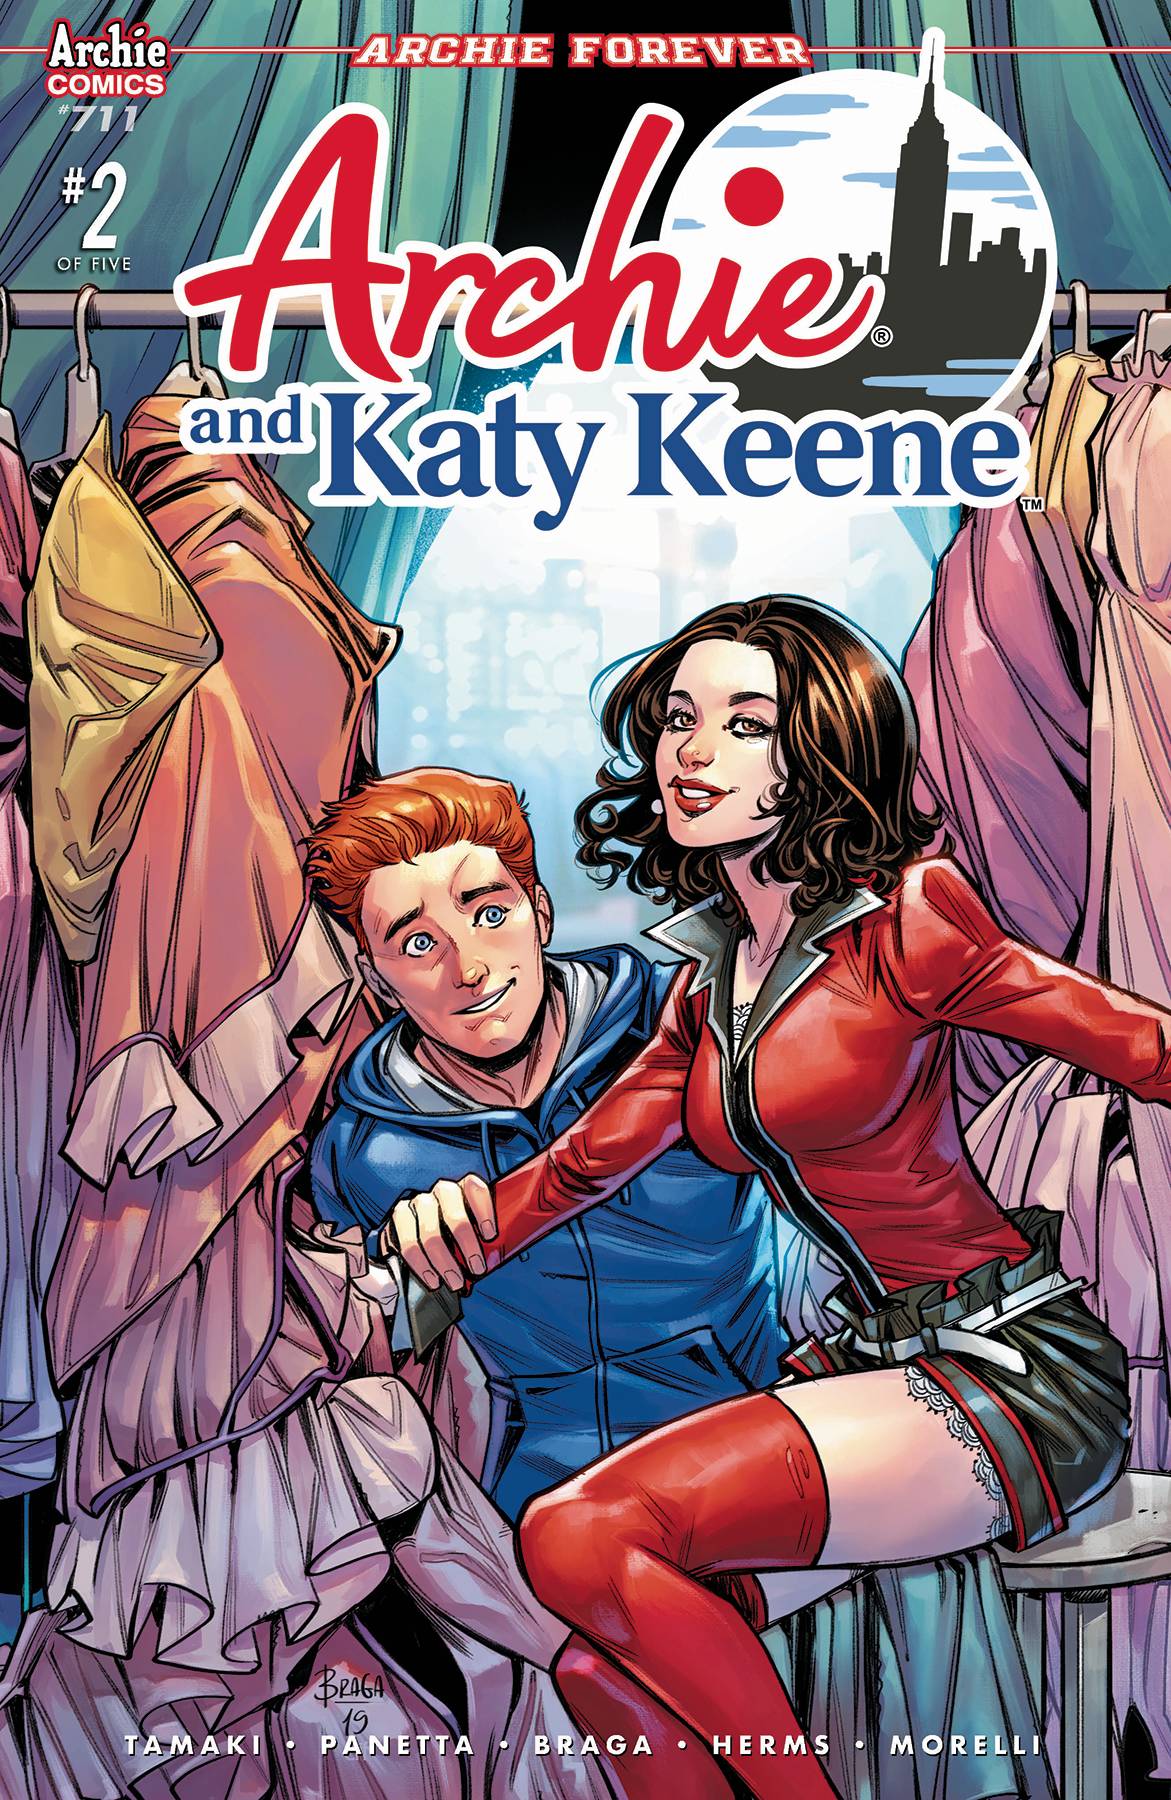 Archie #711 (Archie & Katy Keene Part 2) Cover A Braga